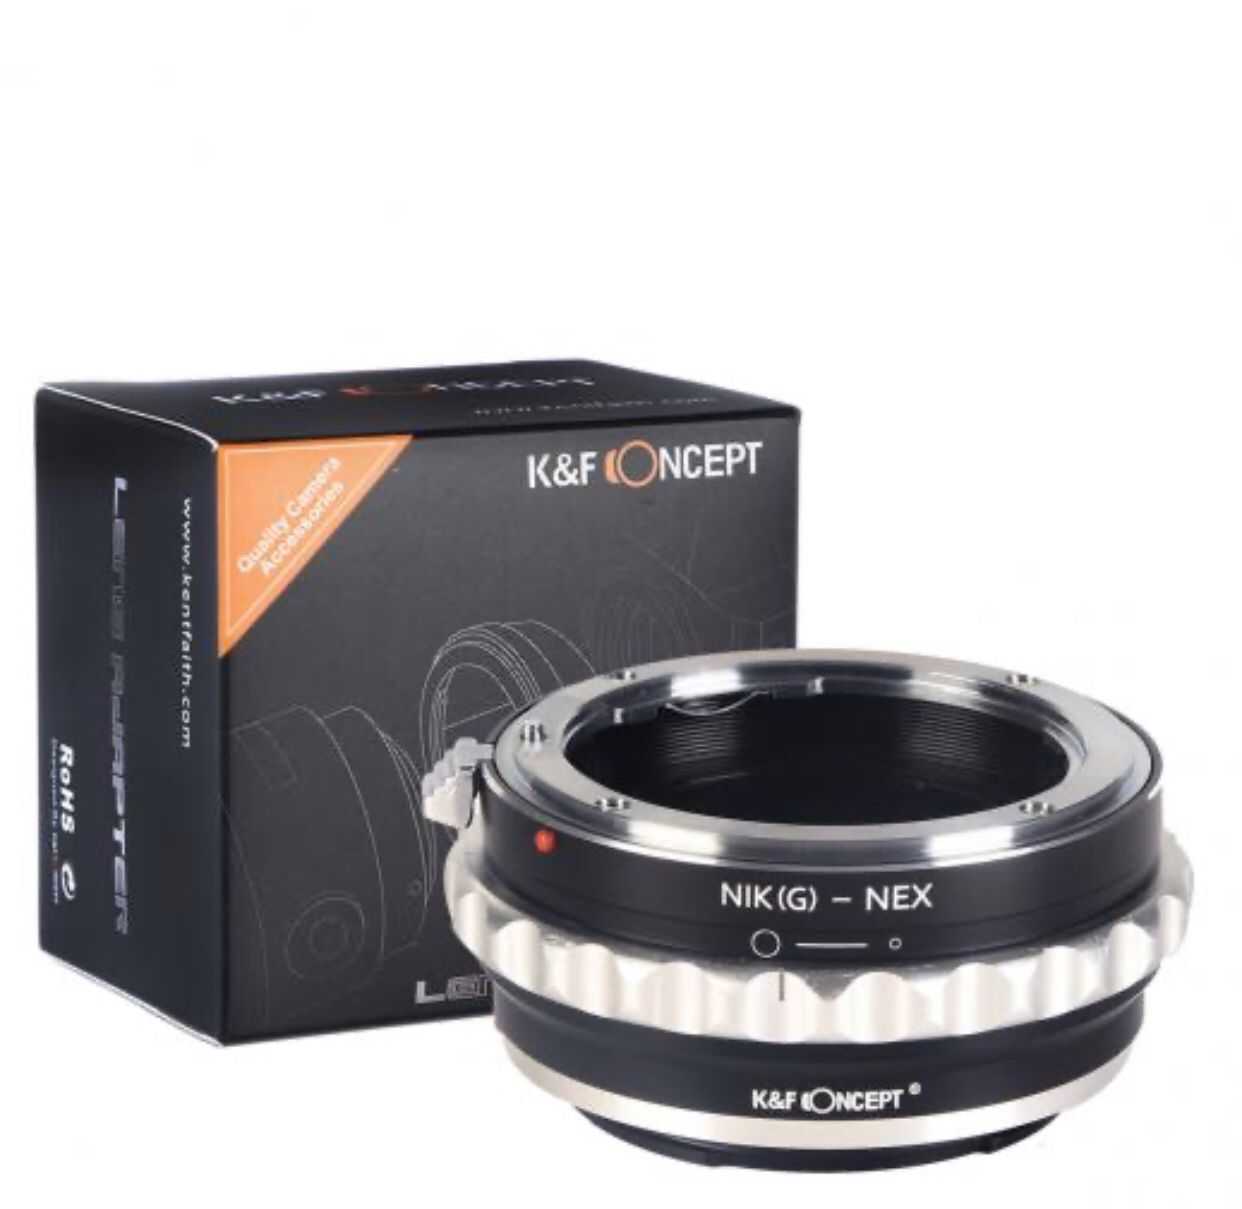 NEW K&F Concept Nikon to Sony lens adapter - photography - video - college - students - film - DSLR - Mirrorless